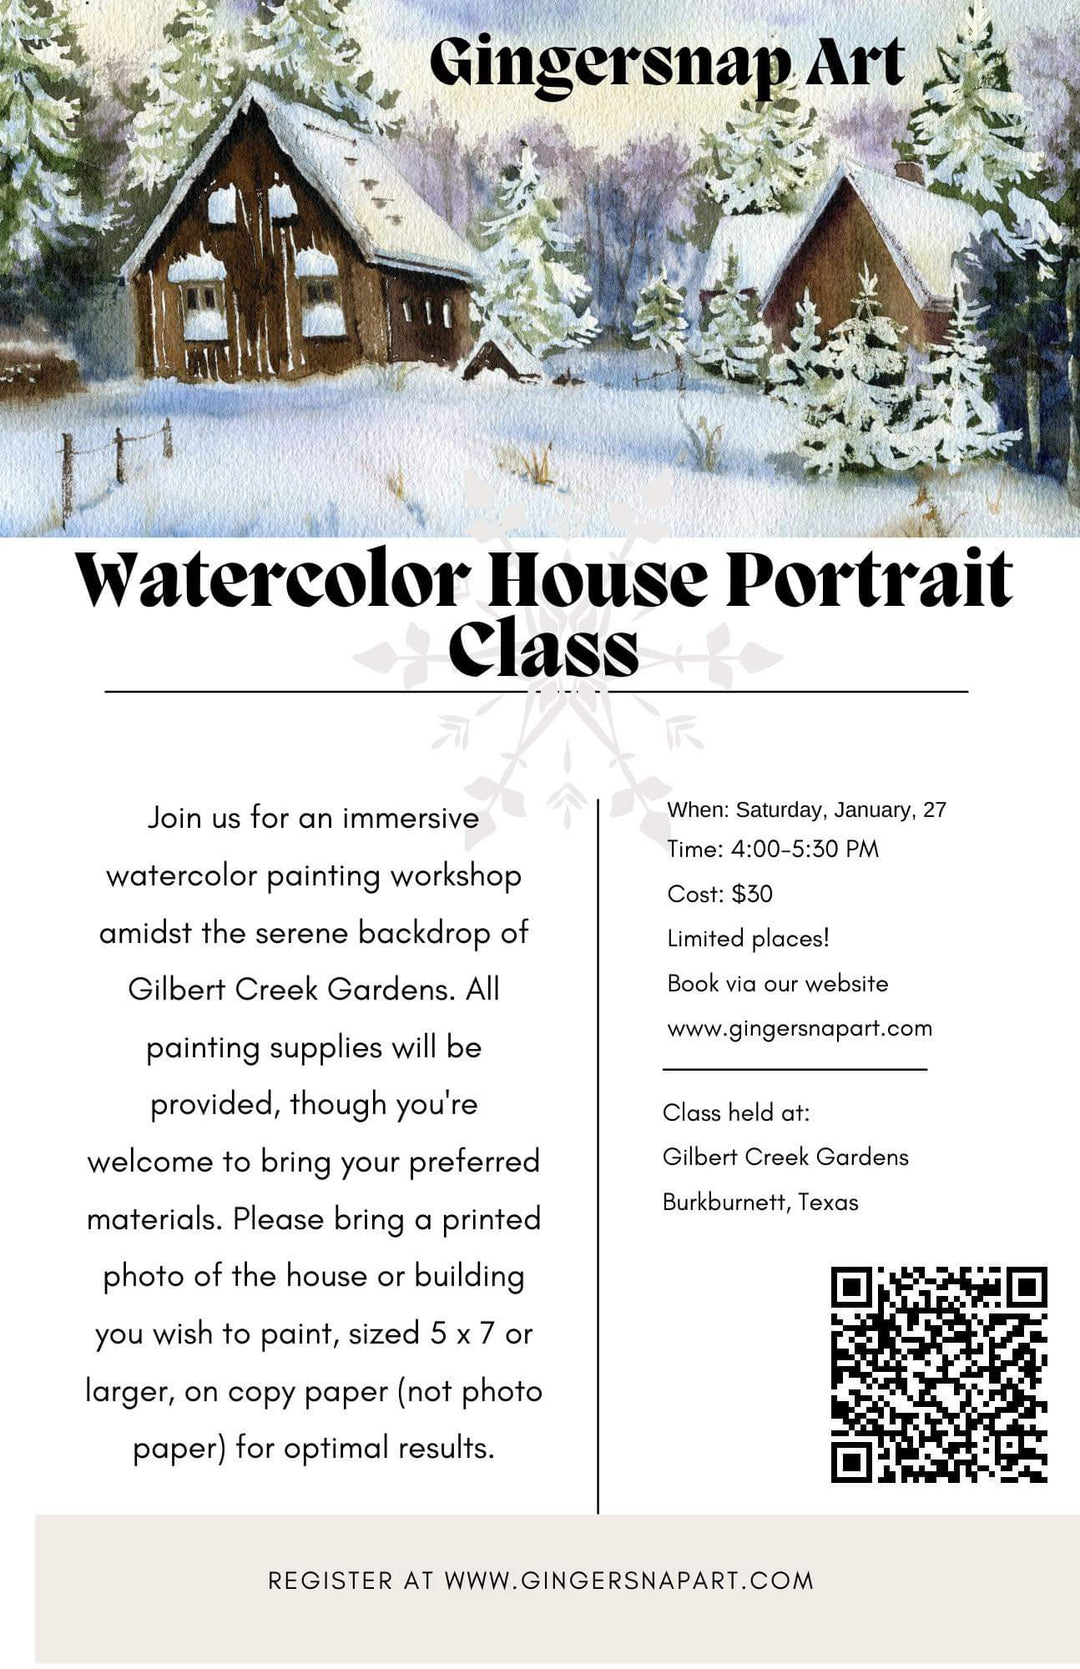 Watercolor House Portrait Class with Gingersnap Art